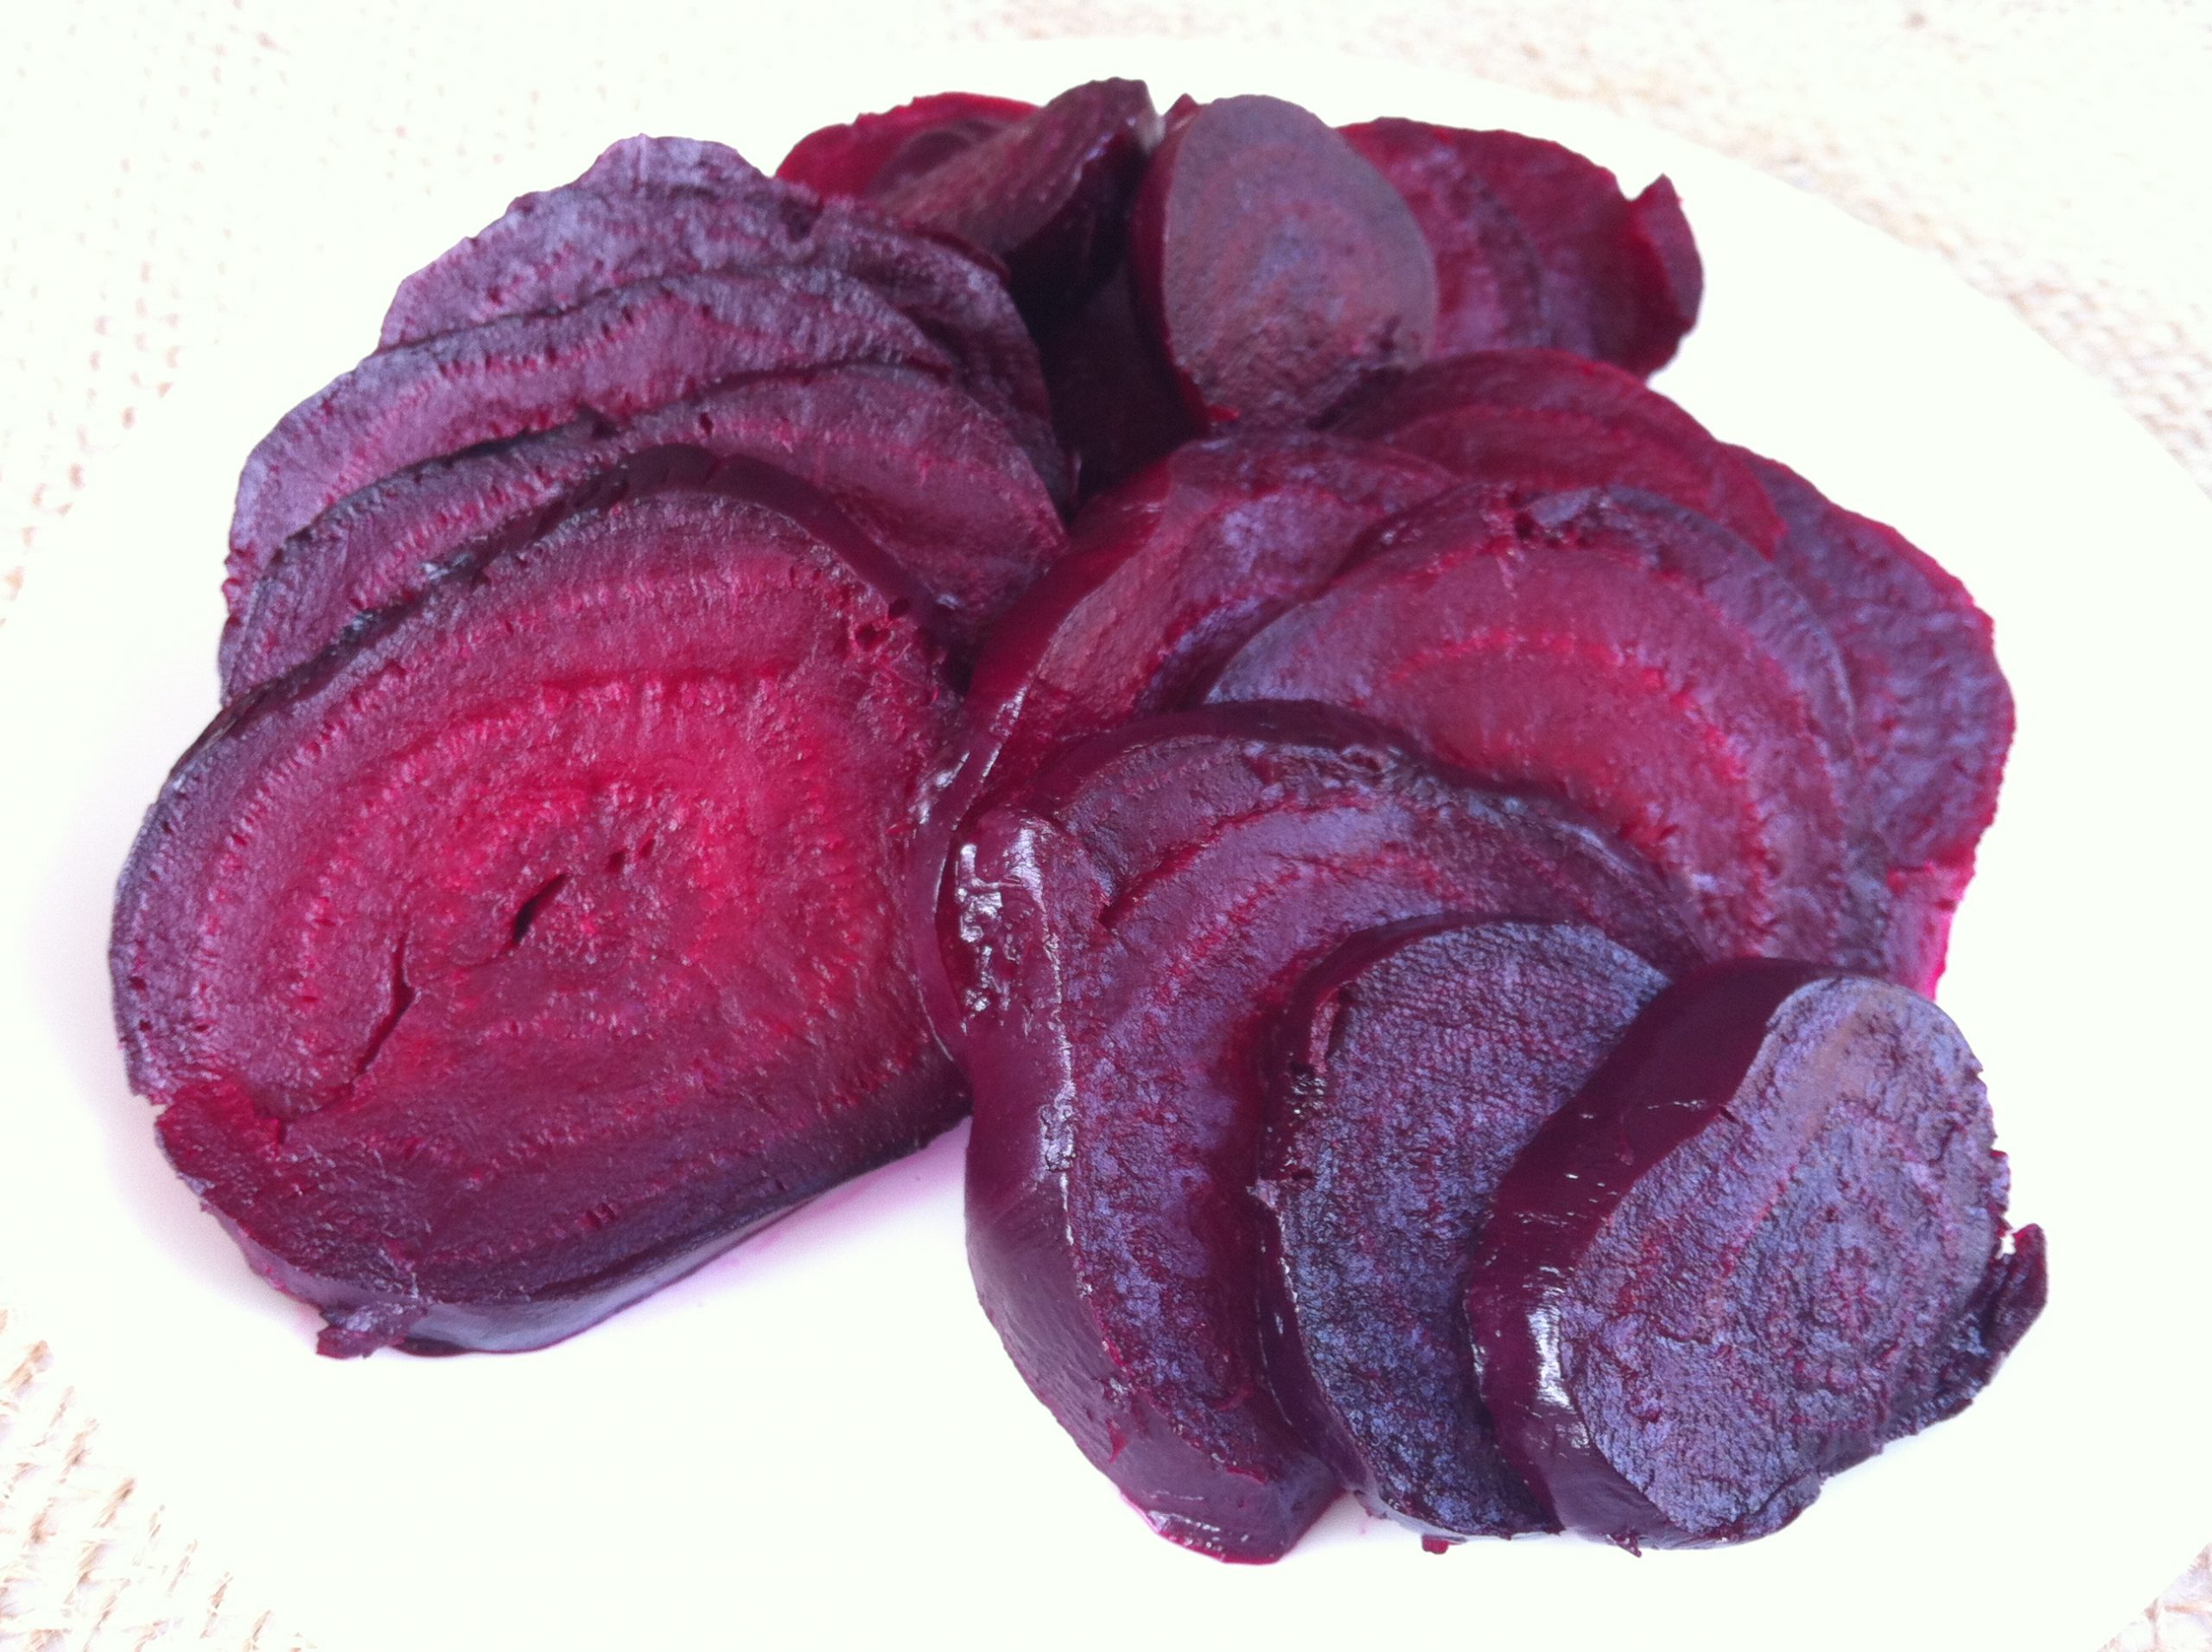 Recipe for roasted beets - sliced